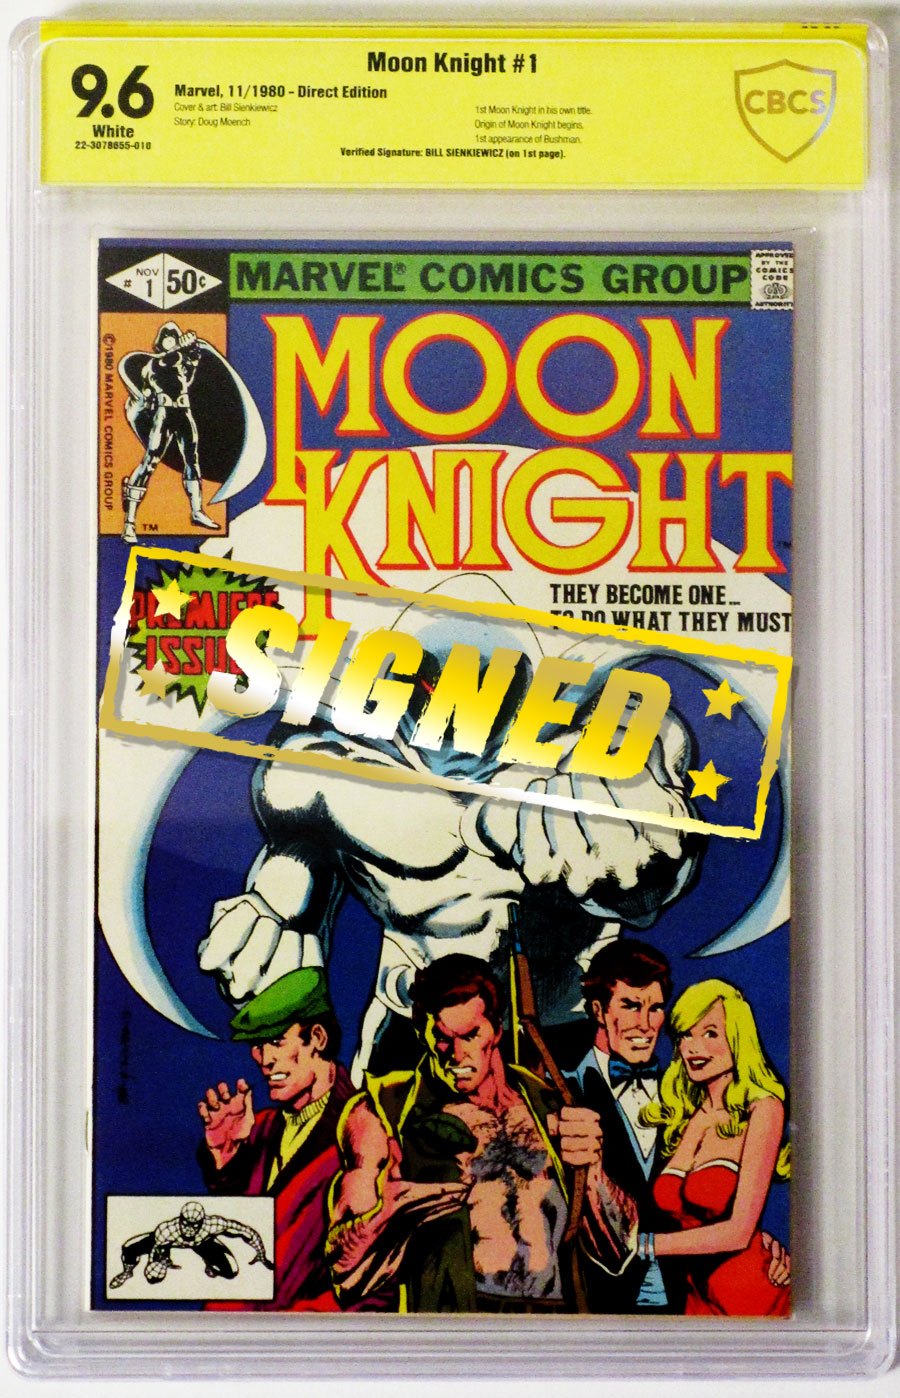 Moon Knight Vol 1 #1 Cover D Signed By Bill Sienkiewicz CBCS 9.6